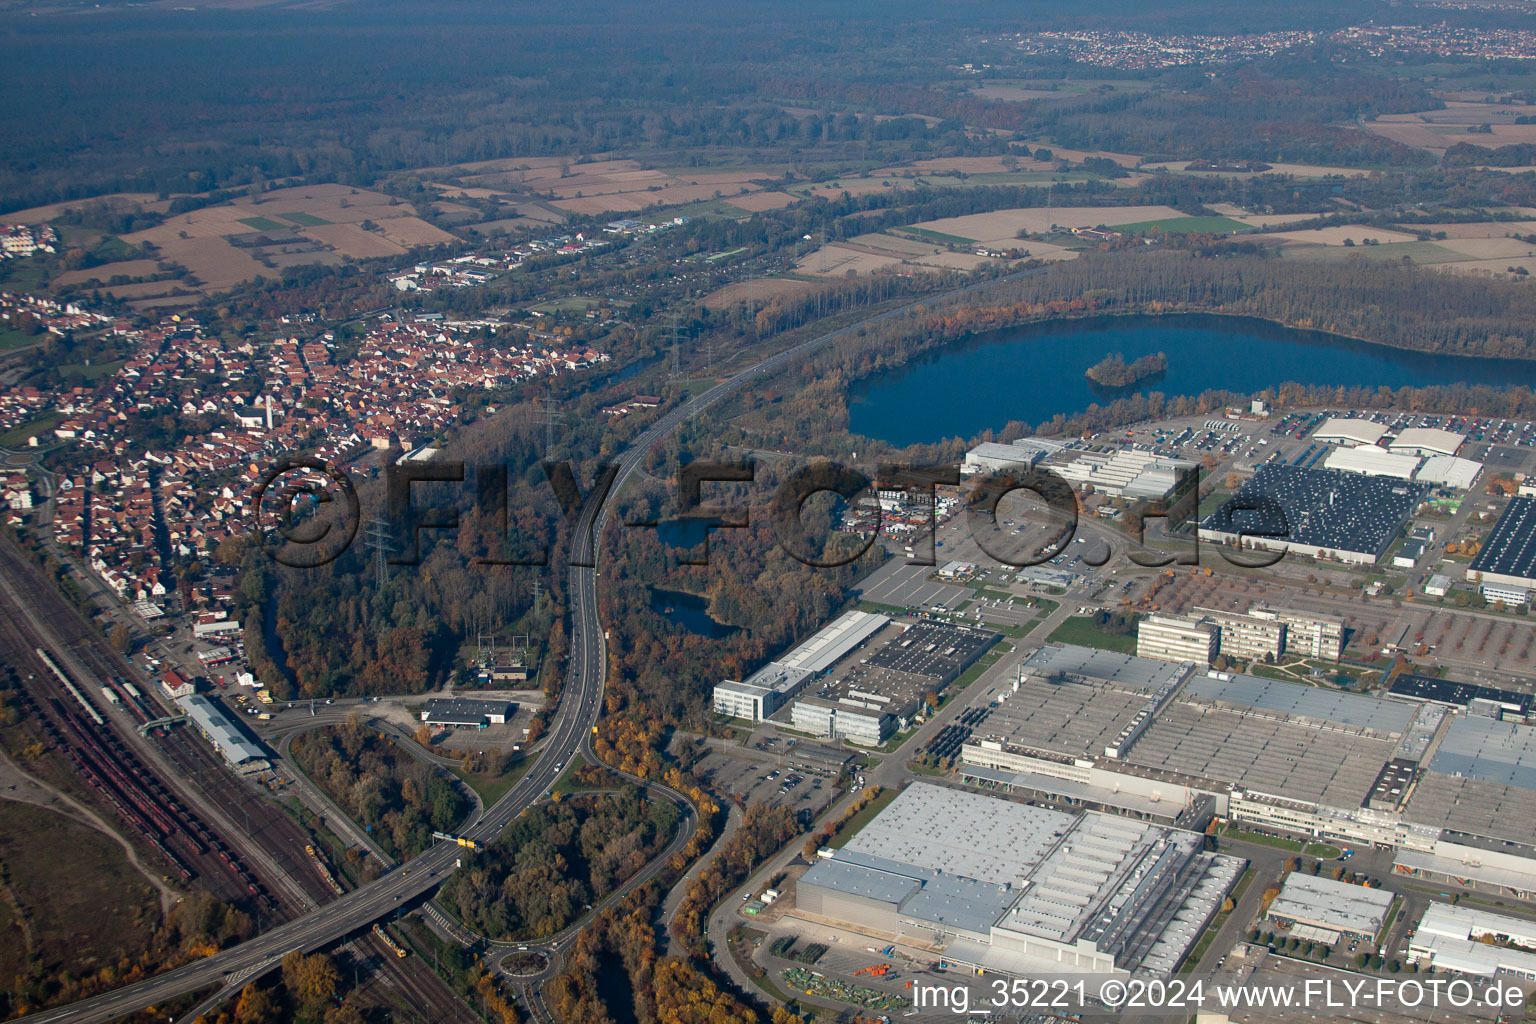 Aerial view of From the east in Wörth am Rhein in the state Rhineland-Palatinate, Germany